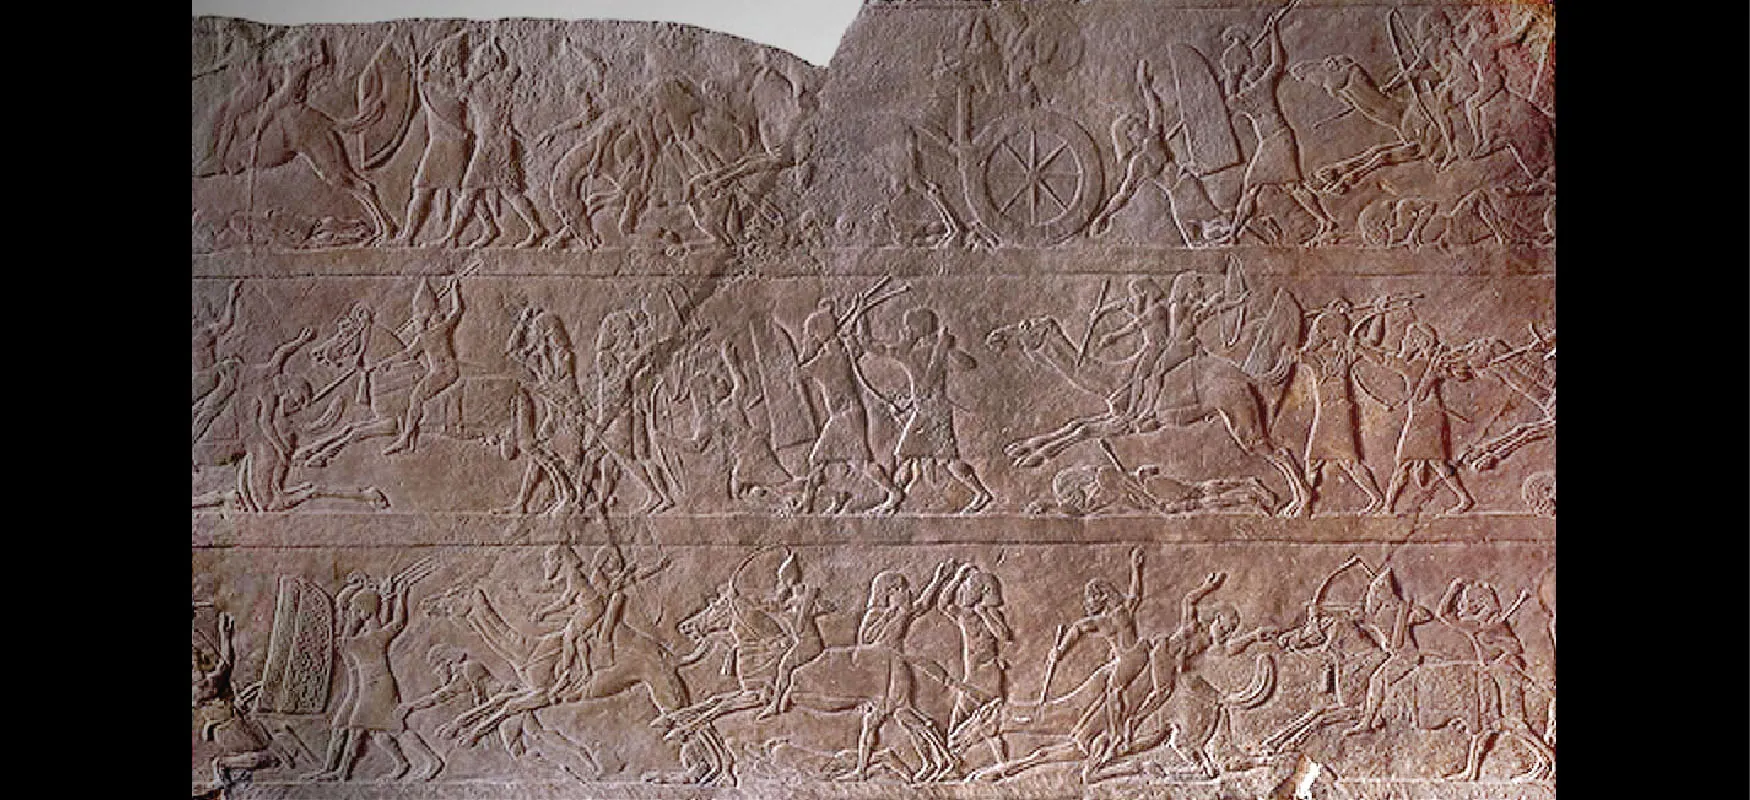 A picture of a piece of brown stone is shown with carvings of three rows of fighting scenes. The top of the stone is broken on the left side and there is a crack running down the middle of the stone. The scenes depict images from combat – people dressed in cloths tied around their waists and elaborate headdresses using shields to protect themselves. Some are fighting with spears, swords, bows and arrows, and some are riding camels and horses with chariots. Some people are laying on the ground or falling.